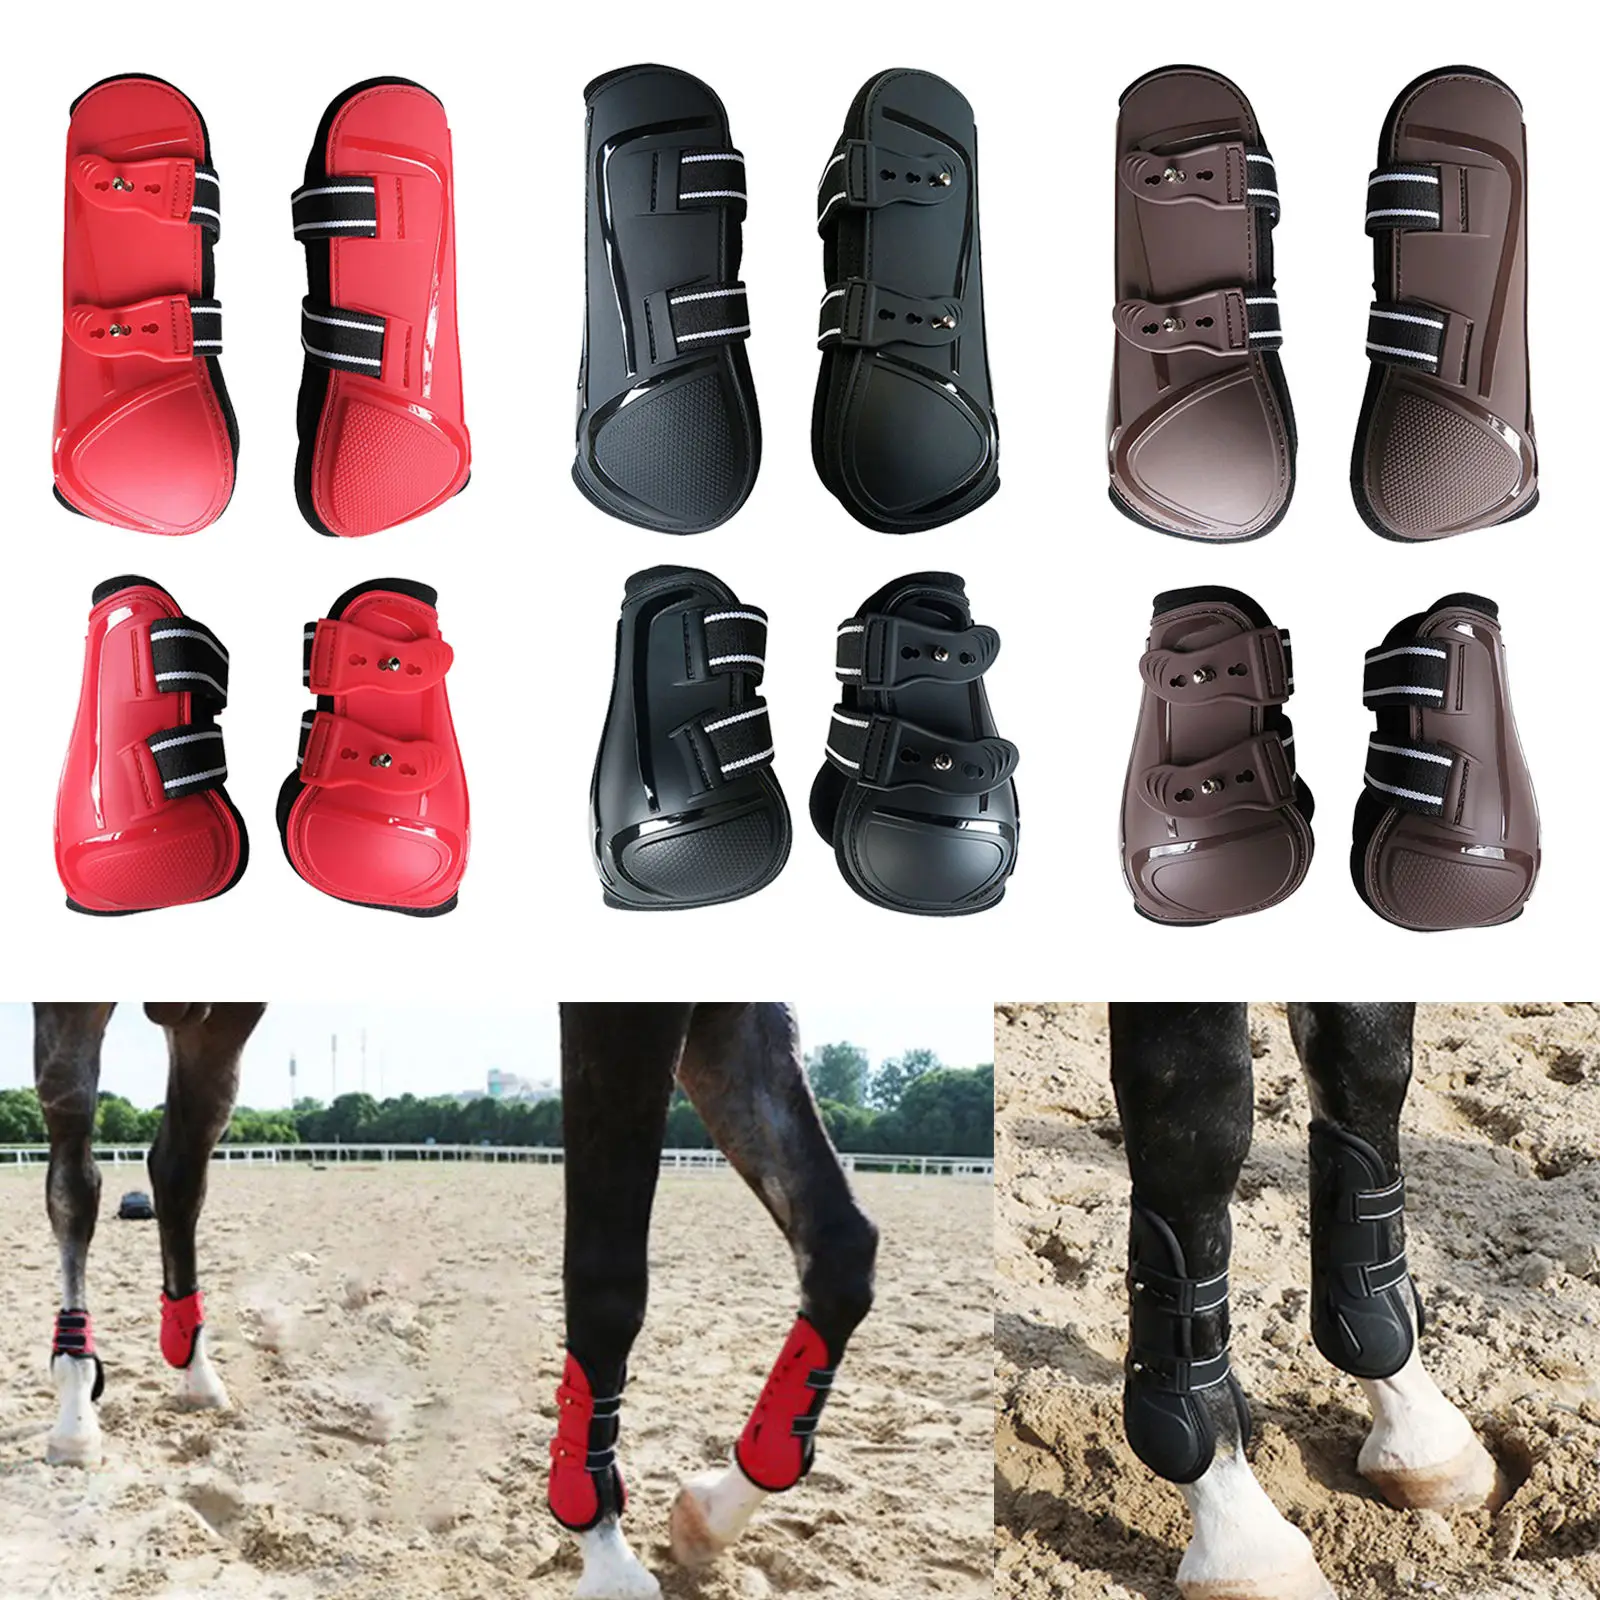 1 Pair Front/Hind Legs Jumping Tendon Horses Boots, Secure Leg Protection, Durable Dressage Horse Riding Equestrian Equipment